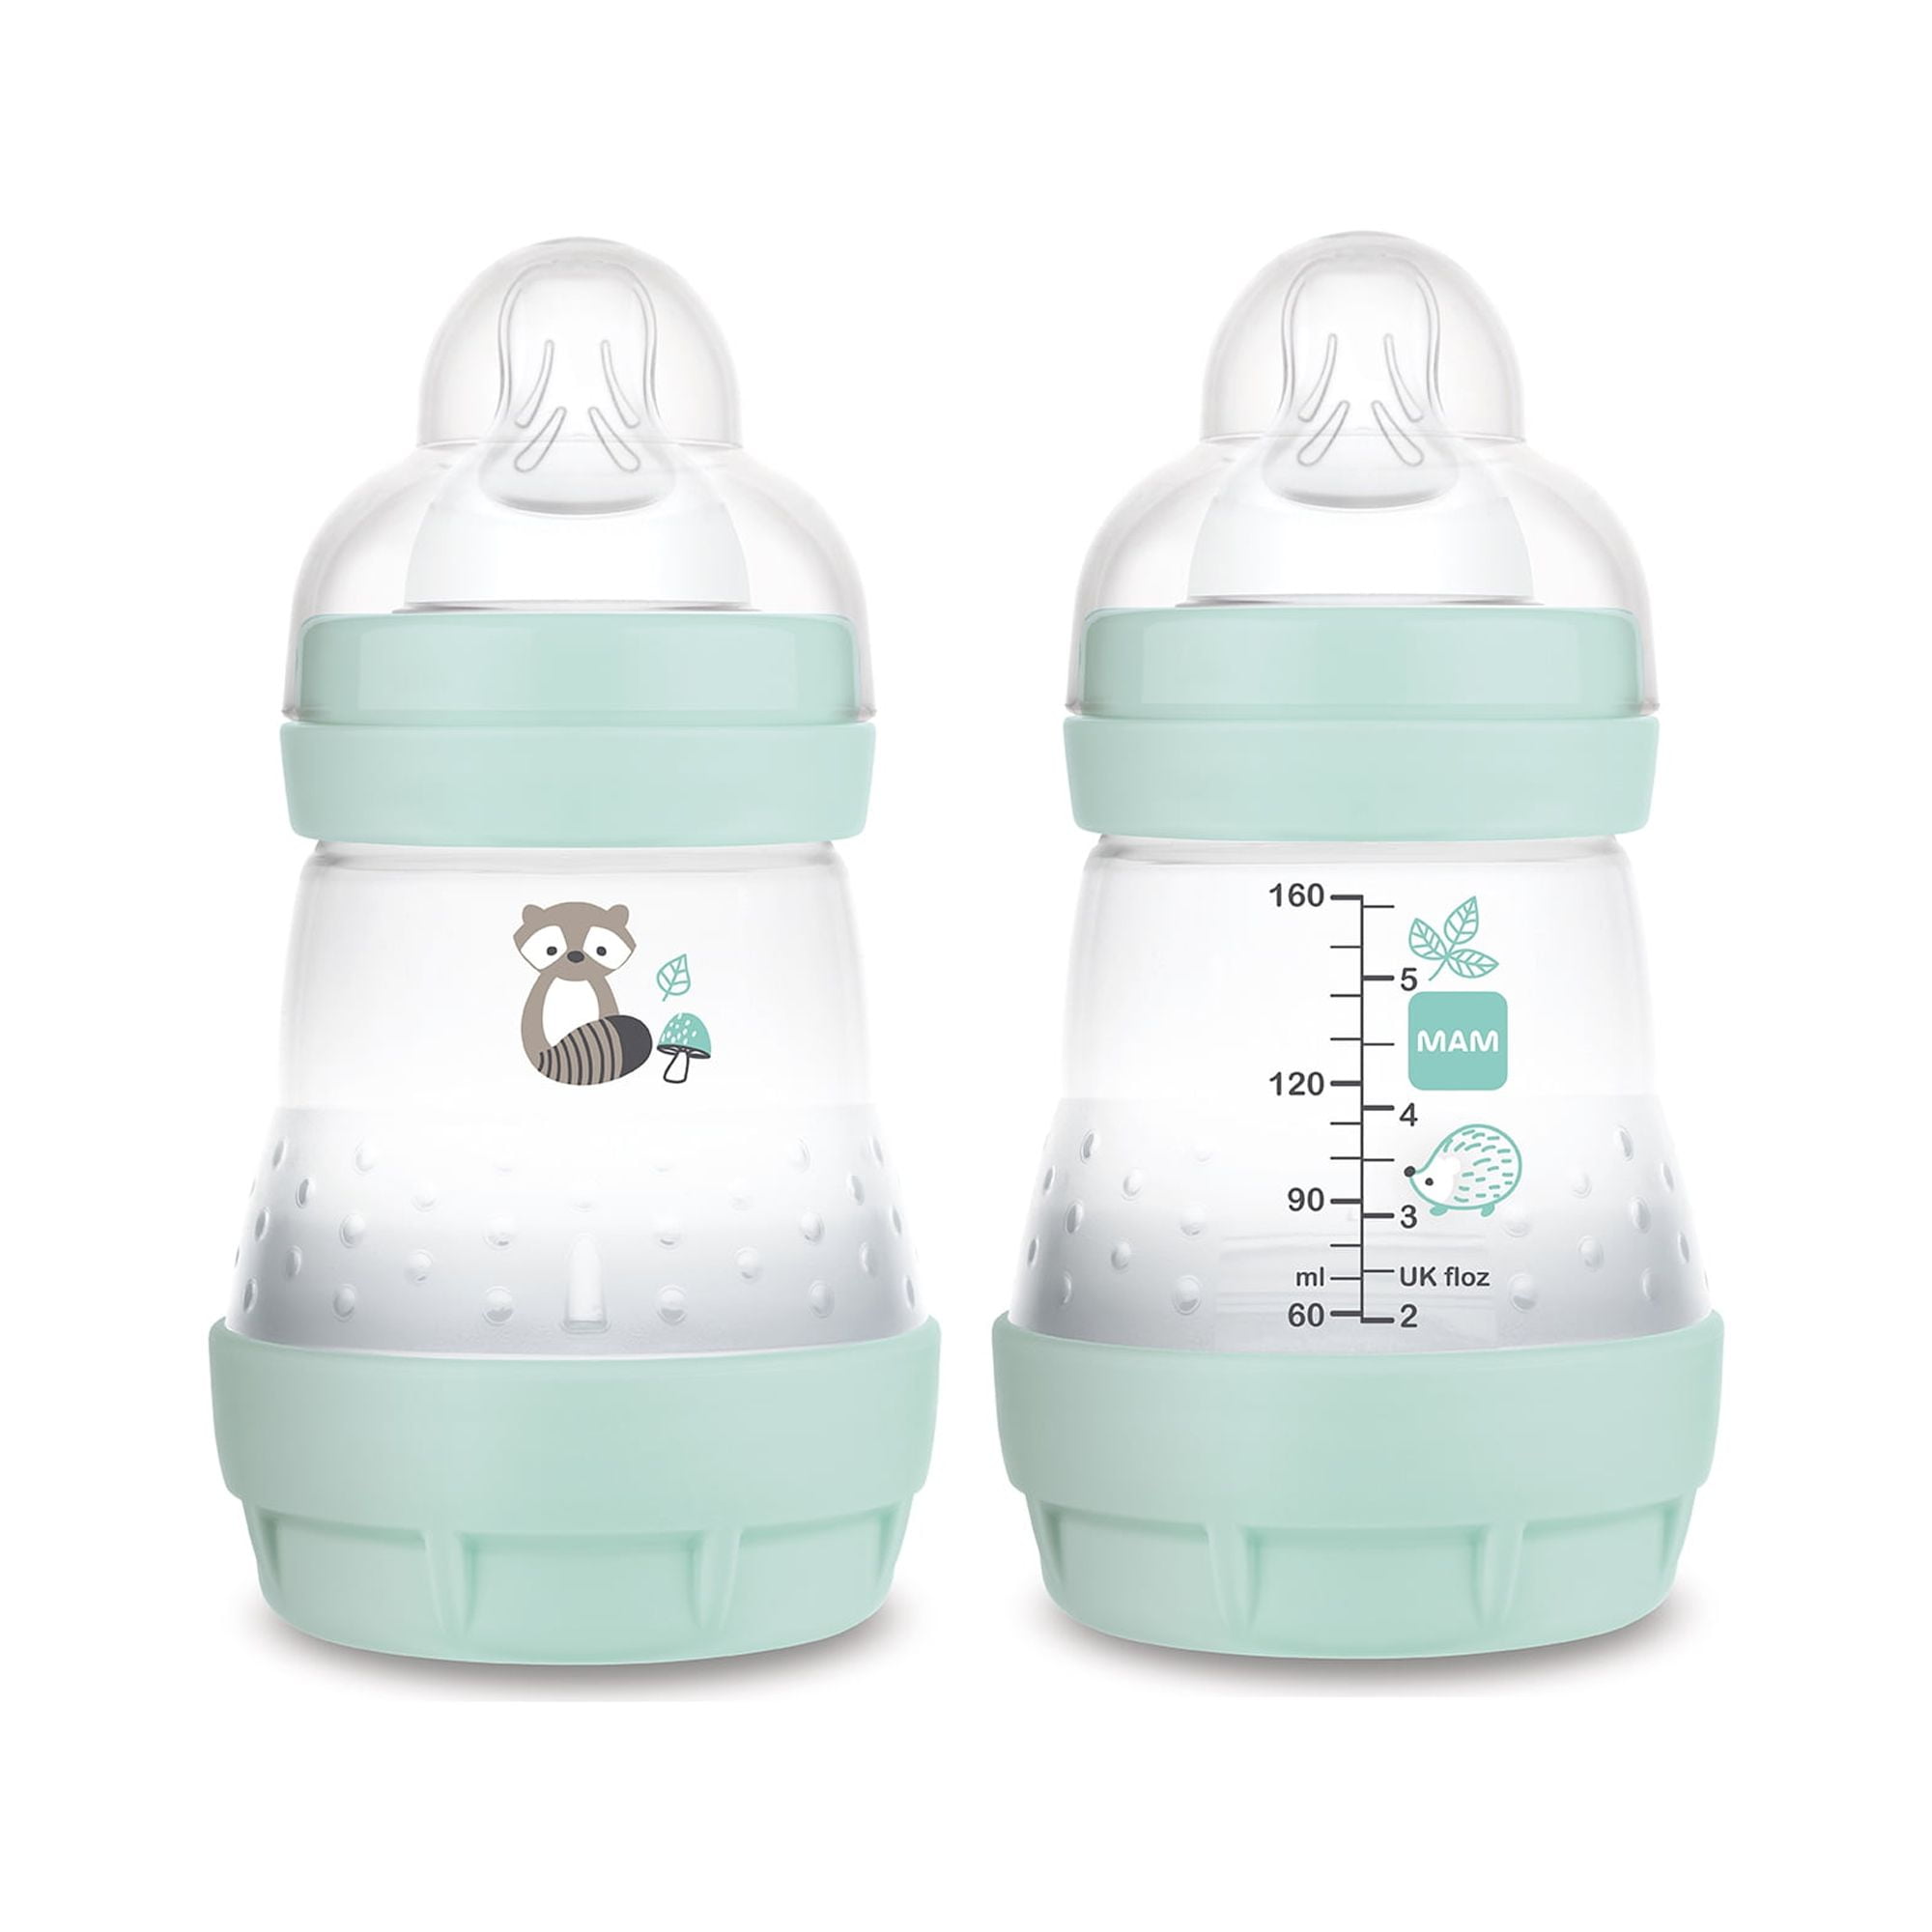 MAM Easy Start Anti Colic 11 oz Baby Bottle Easy Switch Between Breast and  Bottle Reduces Air Bubbles and Colic 2 Pack 4+ Months Matte/Boy